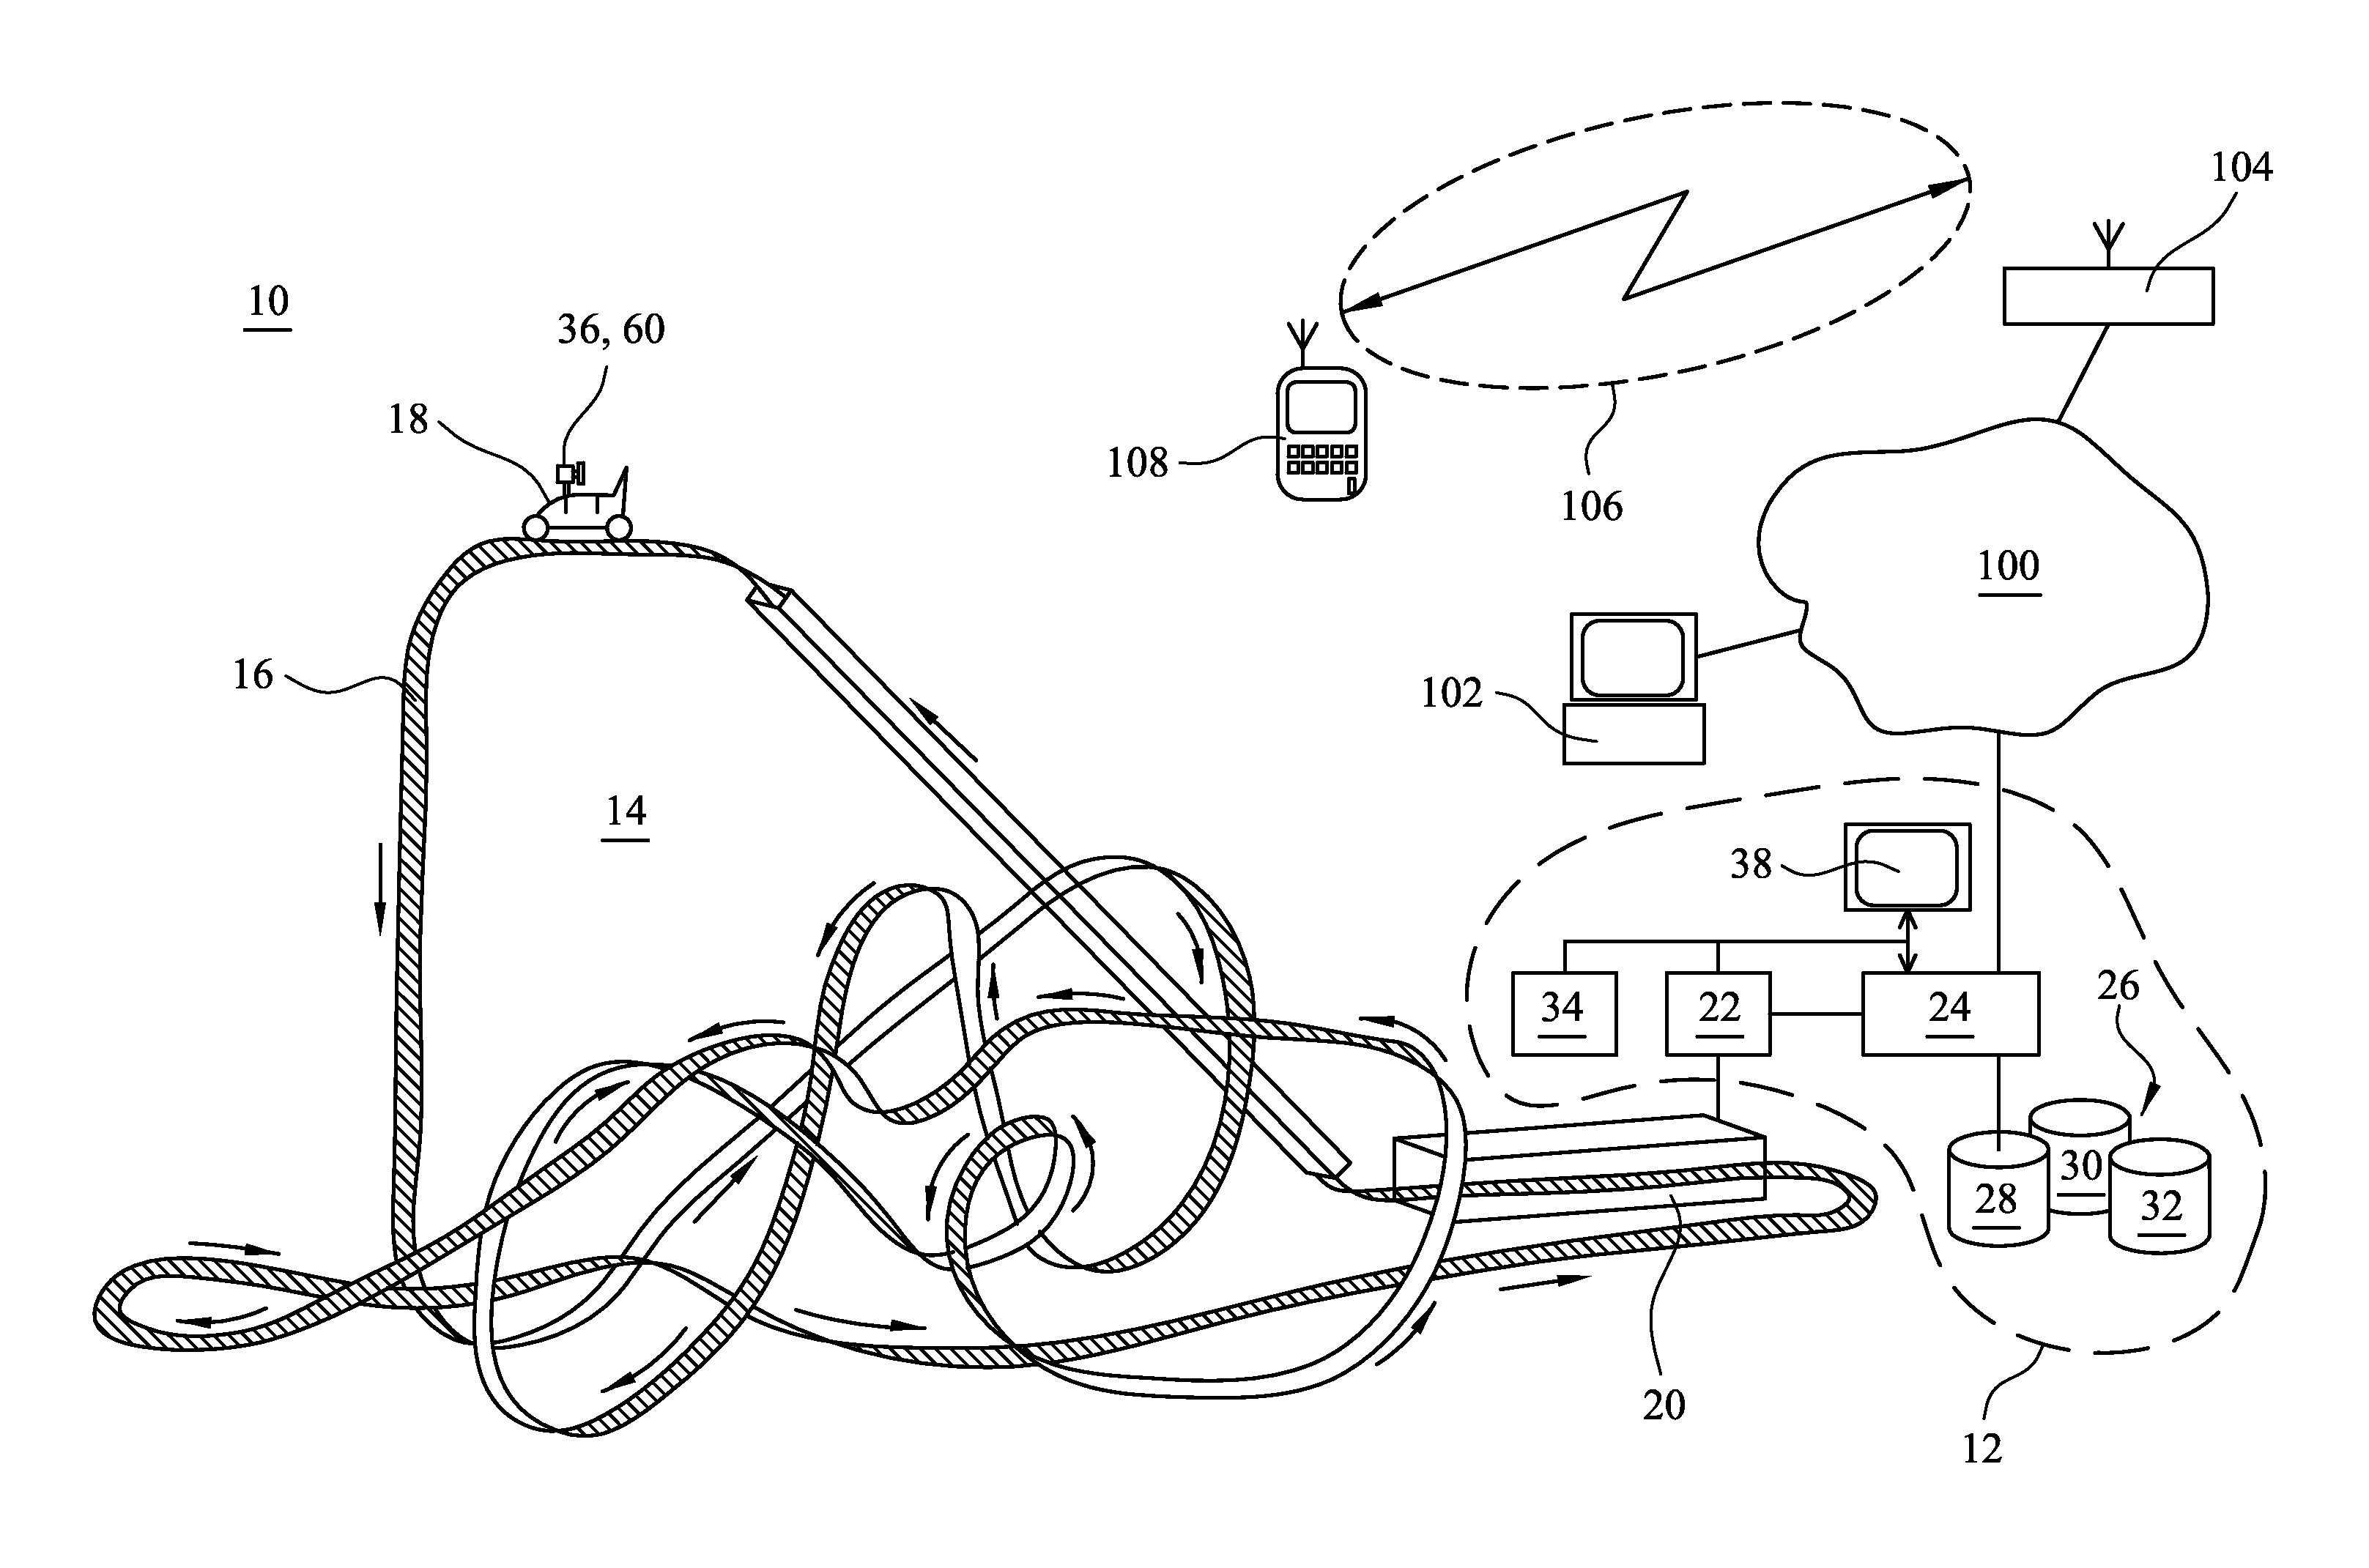 Video acquisition and compilation system and method of assembling and distributing a composite video